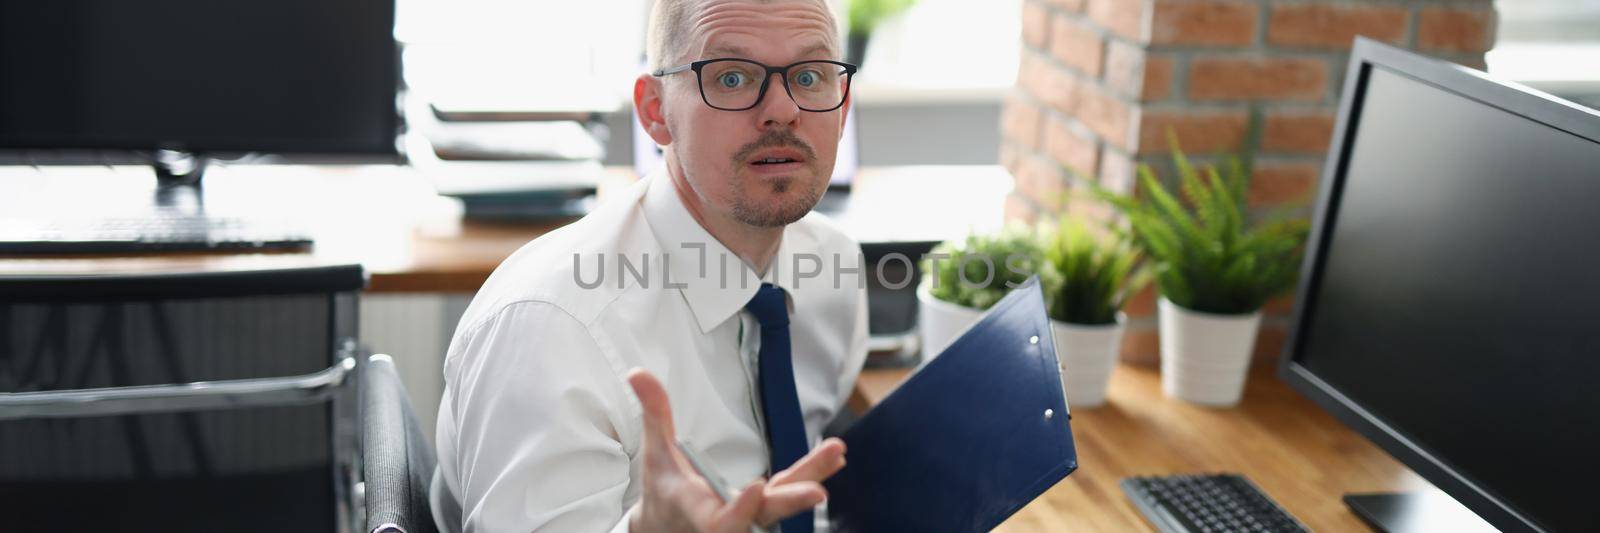 Portrait of employee with mixed emotions, loaded with work, stressed with paperwork. Man in suit on workplace, hard working all day, no break for lunch. Business, job concept